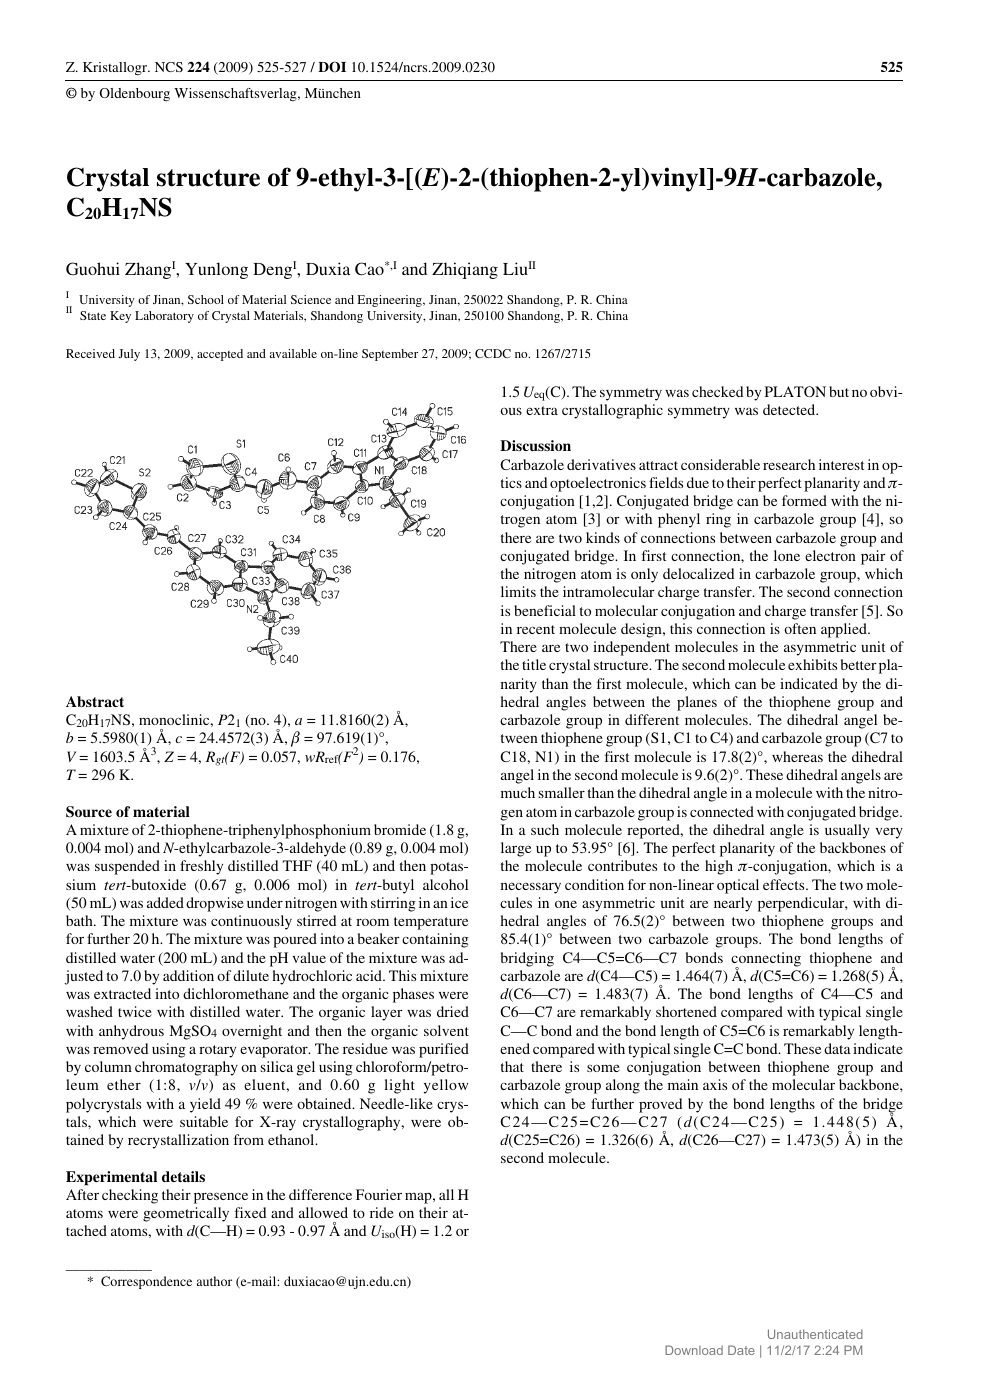 Crystal Structure Of 9 Ethyl 3 E 2 Thiophen 2 Yl Vinyl 9h Carbazole Ch17ns Topic Of Research Paper In Materials Engineering Download Scholarly Article Pdf And Read For Free On Cyberleninka Open Science Hub